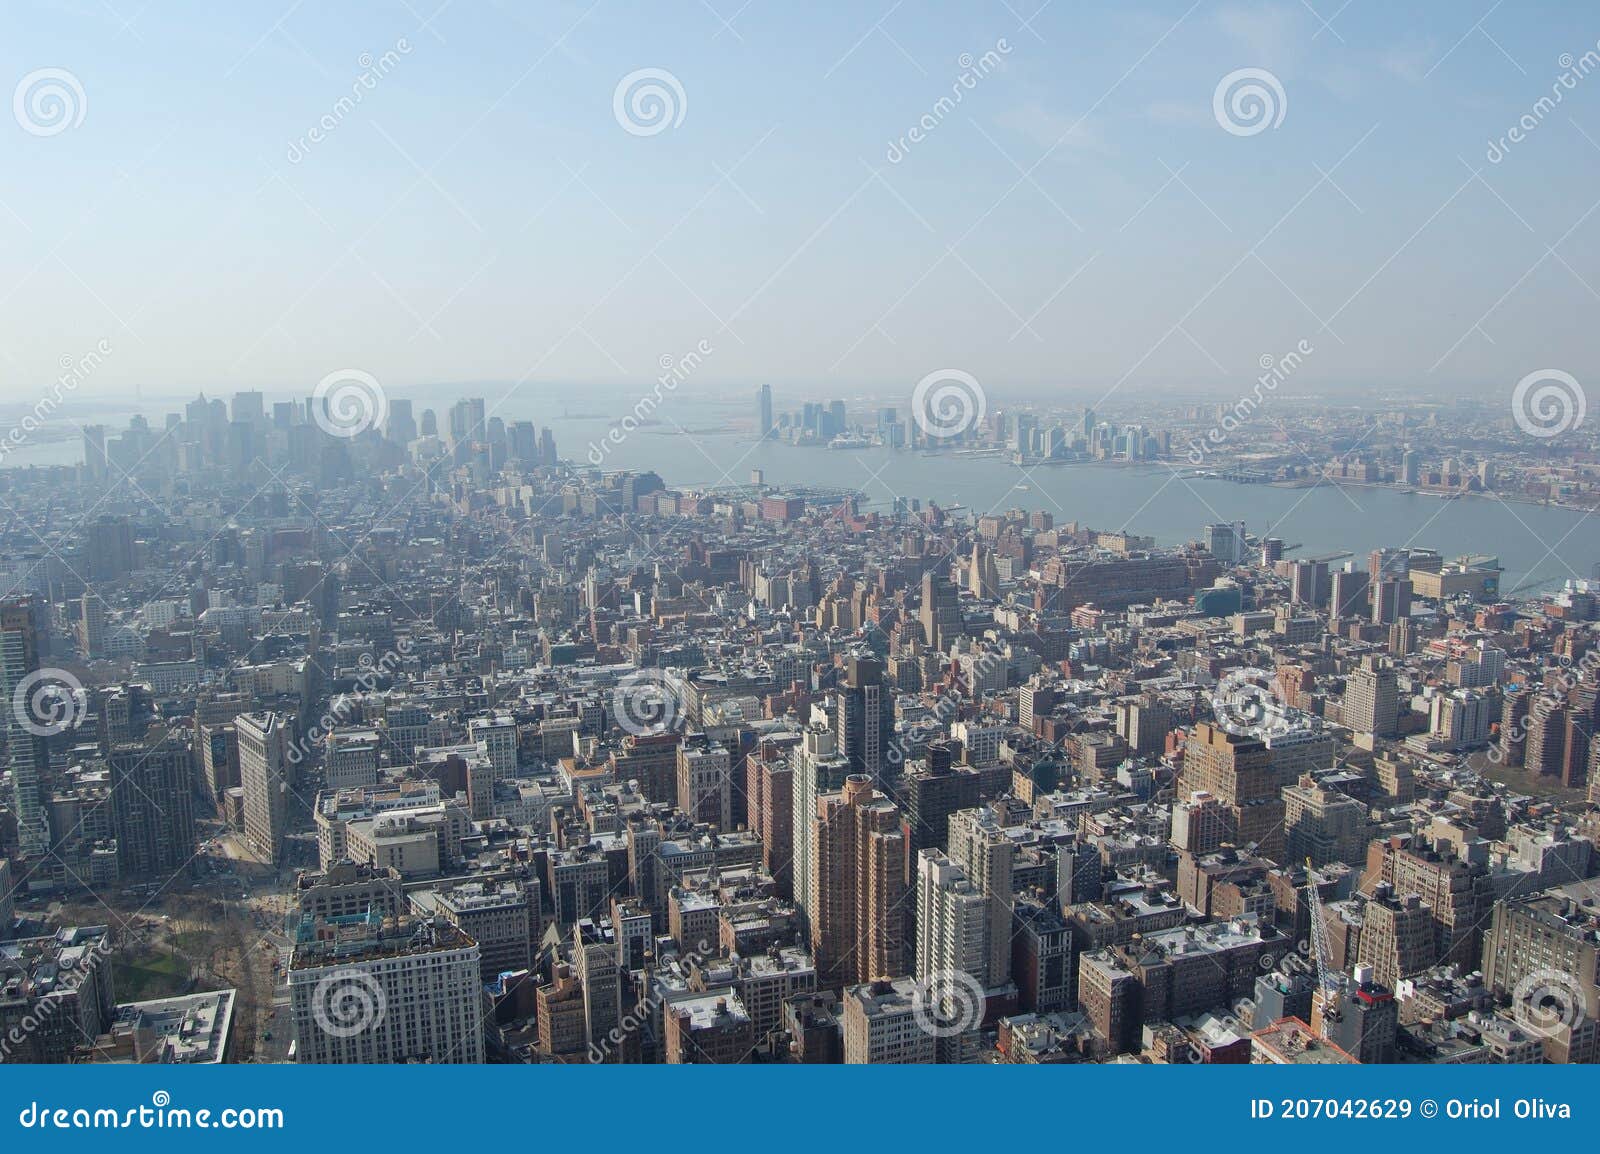 view of the most emblematic buildings and skyscrapers of manhattan (new york).